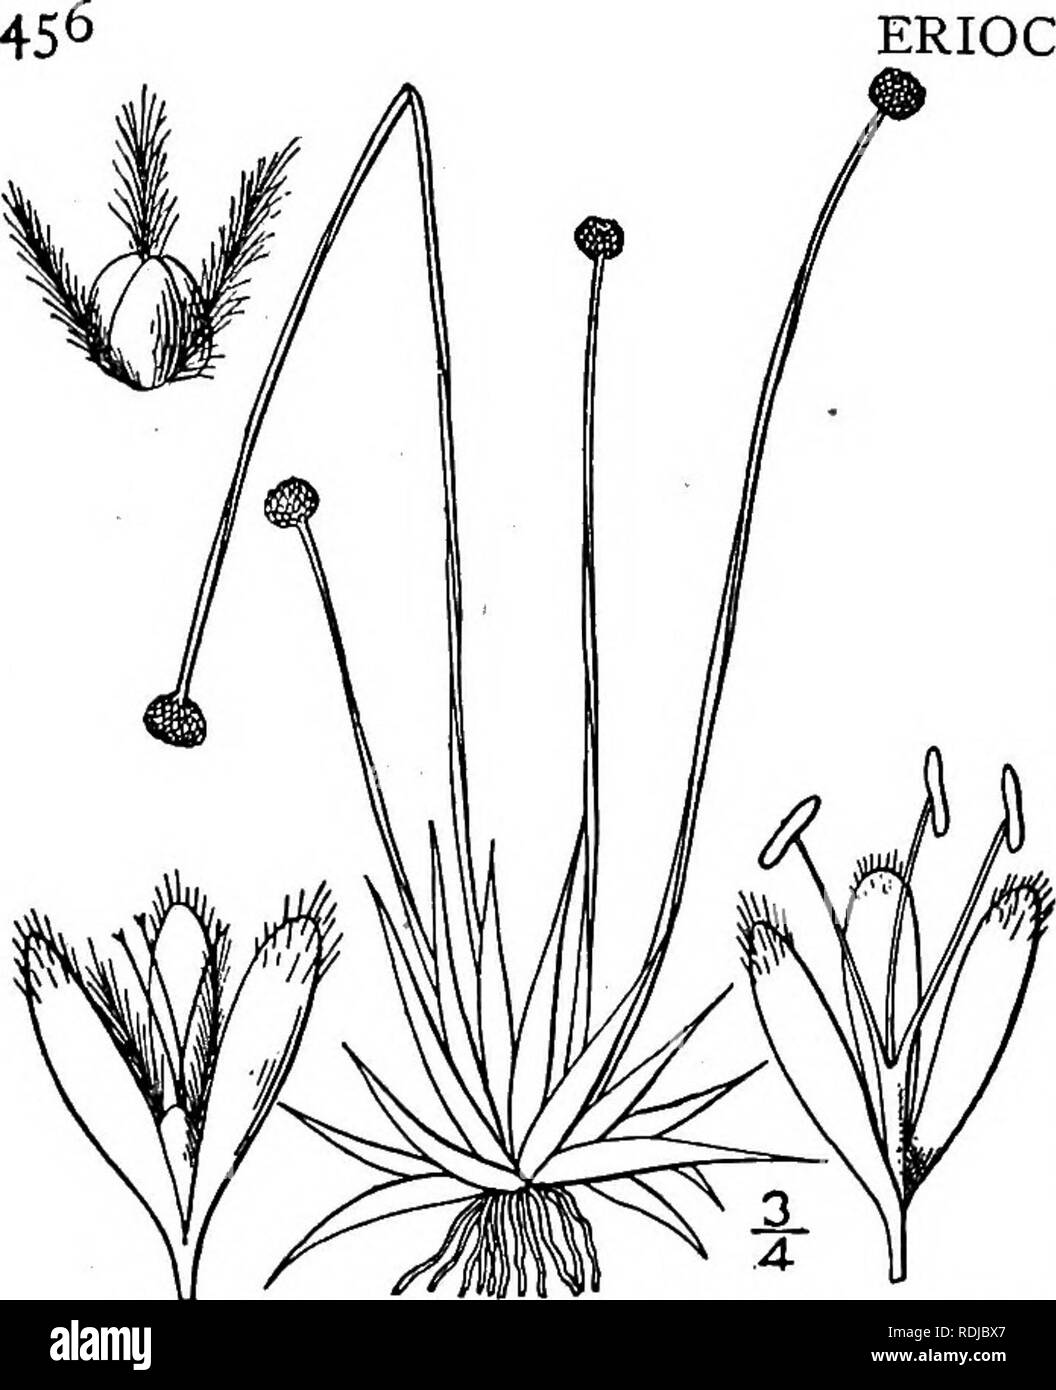 . An illustrated flora of the northern United States, Canada and the British possessions, from Newfoundland to the parallel of the southern boundary of Virginia, and from the Atlantic Ocean westward to the 102d meridian. Botany; Botany. ERIOCAULACEAE. Vol. I. i. Lachnocaulon anceps (Walt.) Morong. Hairy Pipewort. Fig. 1145. Eriocaulon anceps Walt. Fl. Car. 83. 1788. L. Michauxii Kunth, Enum. 3: 497. 1841. L. anceps Morong, Bull. Torr. Club 18: 360. 1891. Leaves glabrous or sparingly pubescent, i'-3' long, tapering to an obtuse callous tip. Scapes slender, 2-20' tall, 2-4-angled, clothed with l Stock Photo